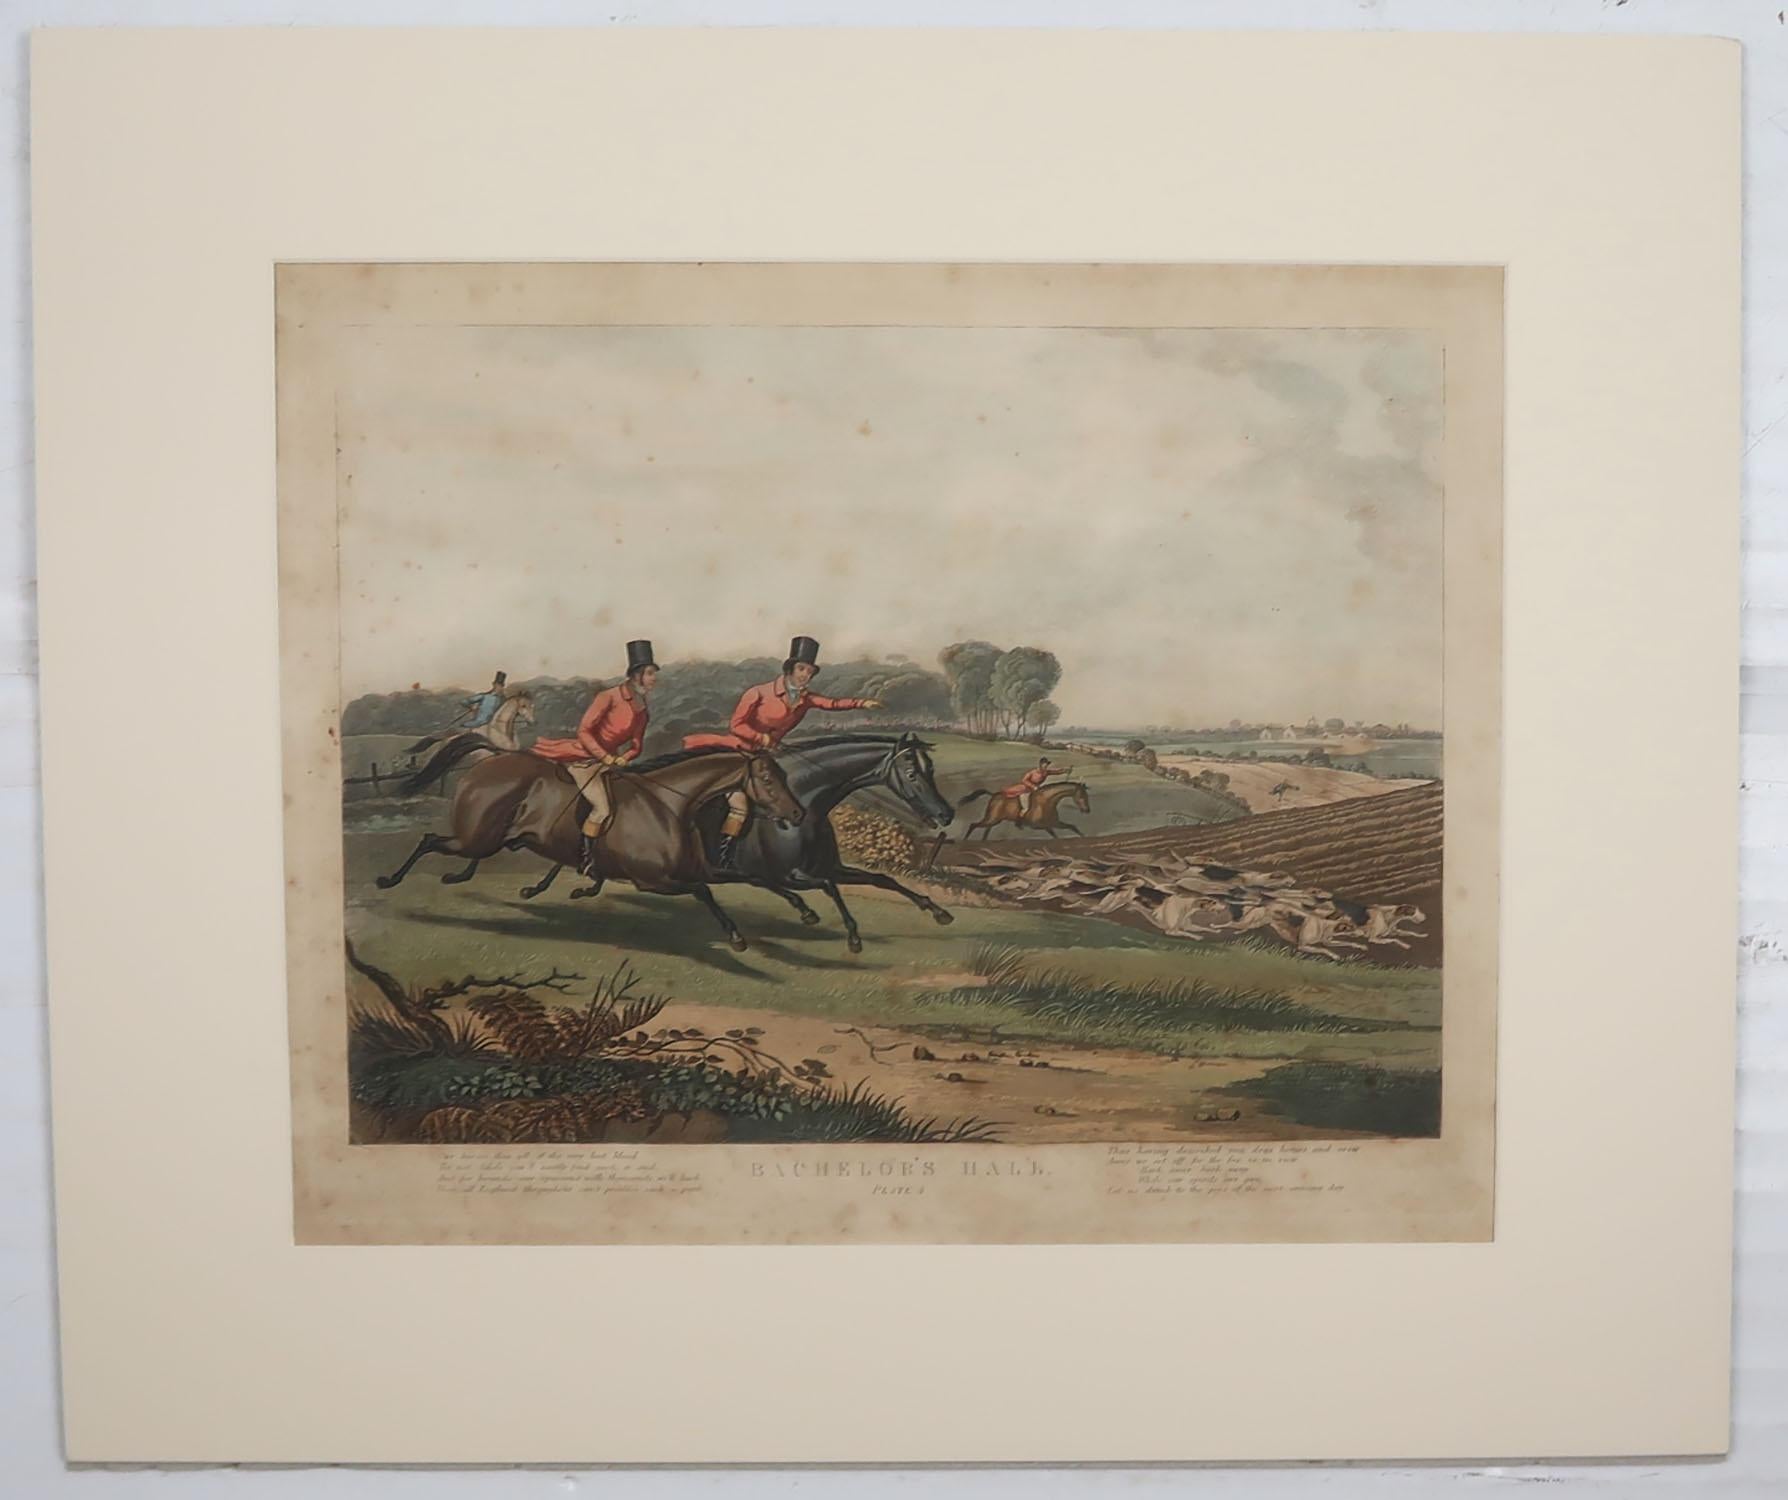 Paper Set of 6 Original Antique Sporting Prints After Turner, Early 19th Century